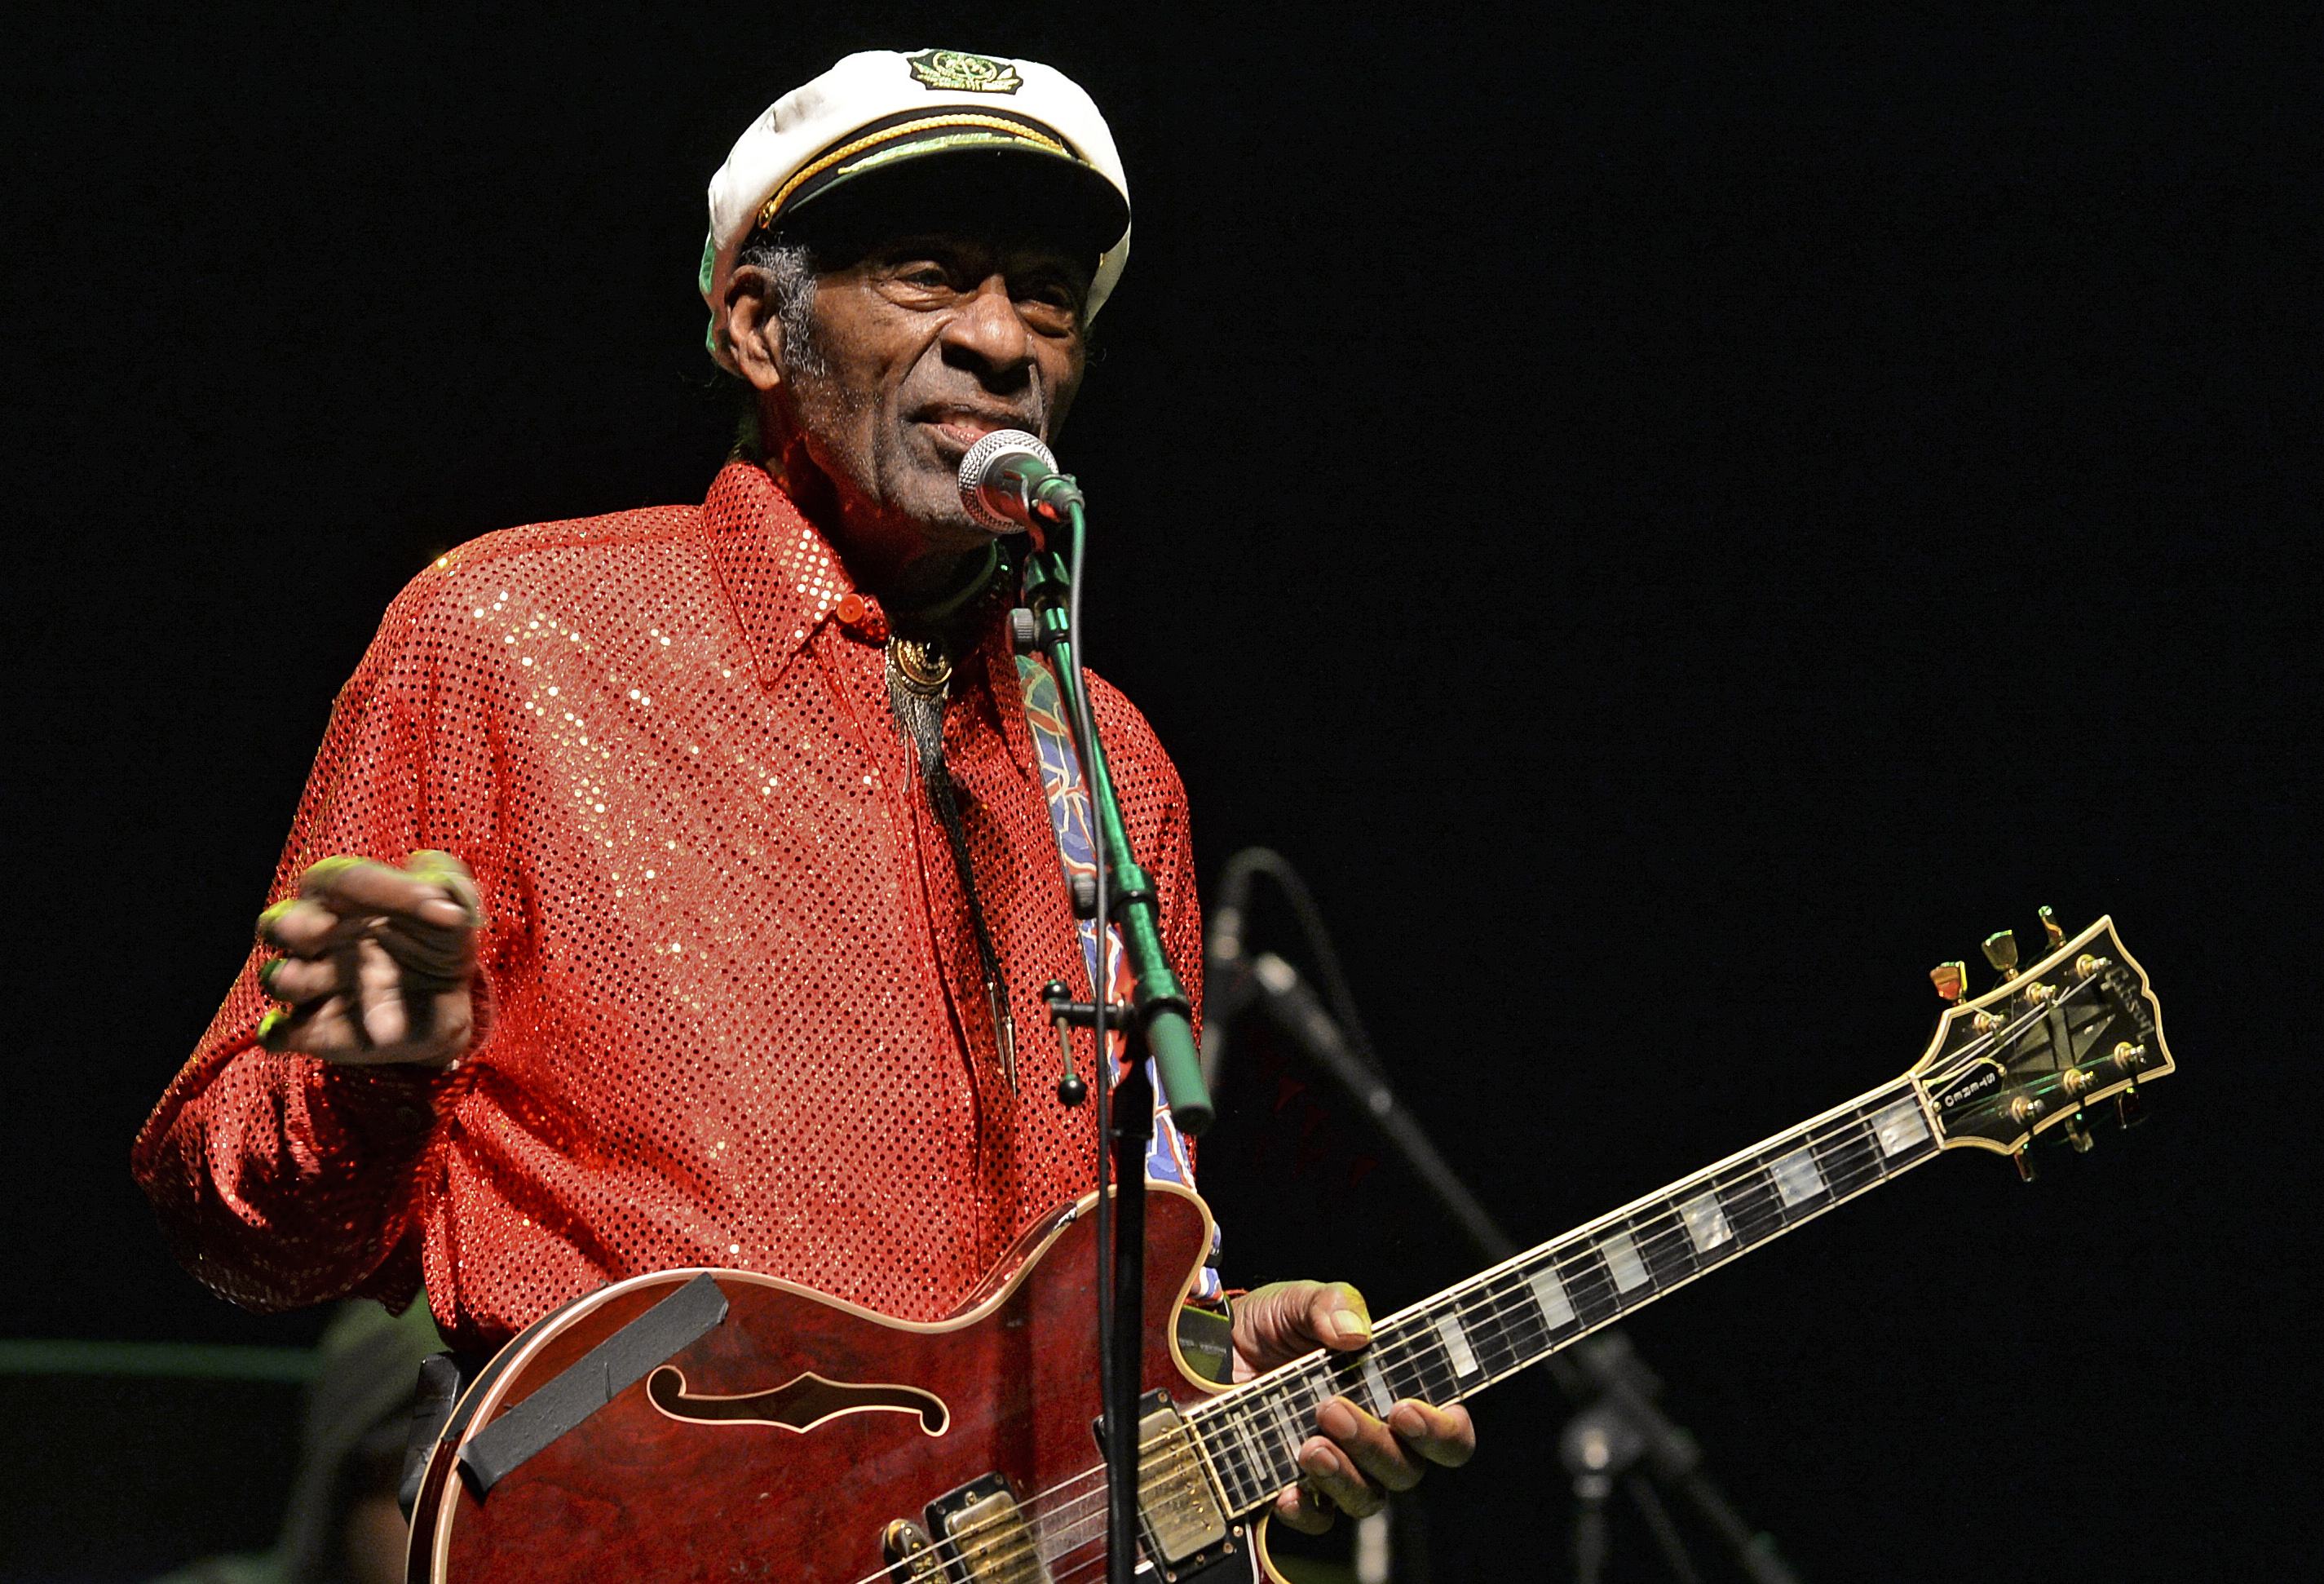 Chuck Berry funeral services set for April 9 in St. Louis | wtsp.com